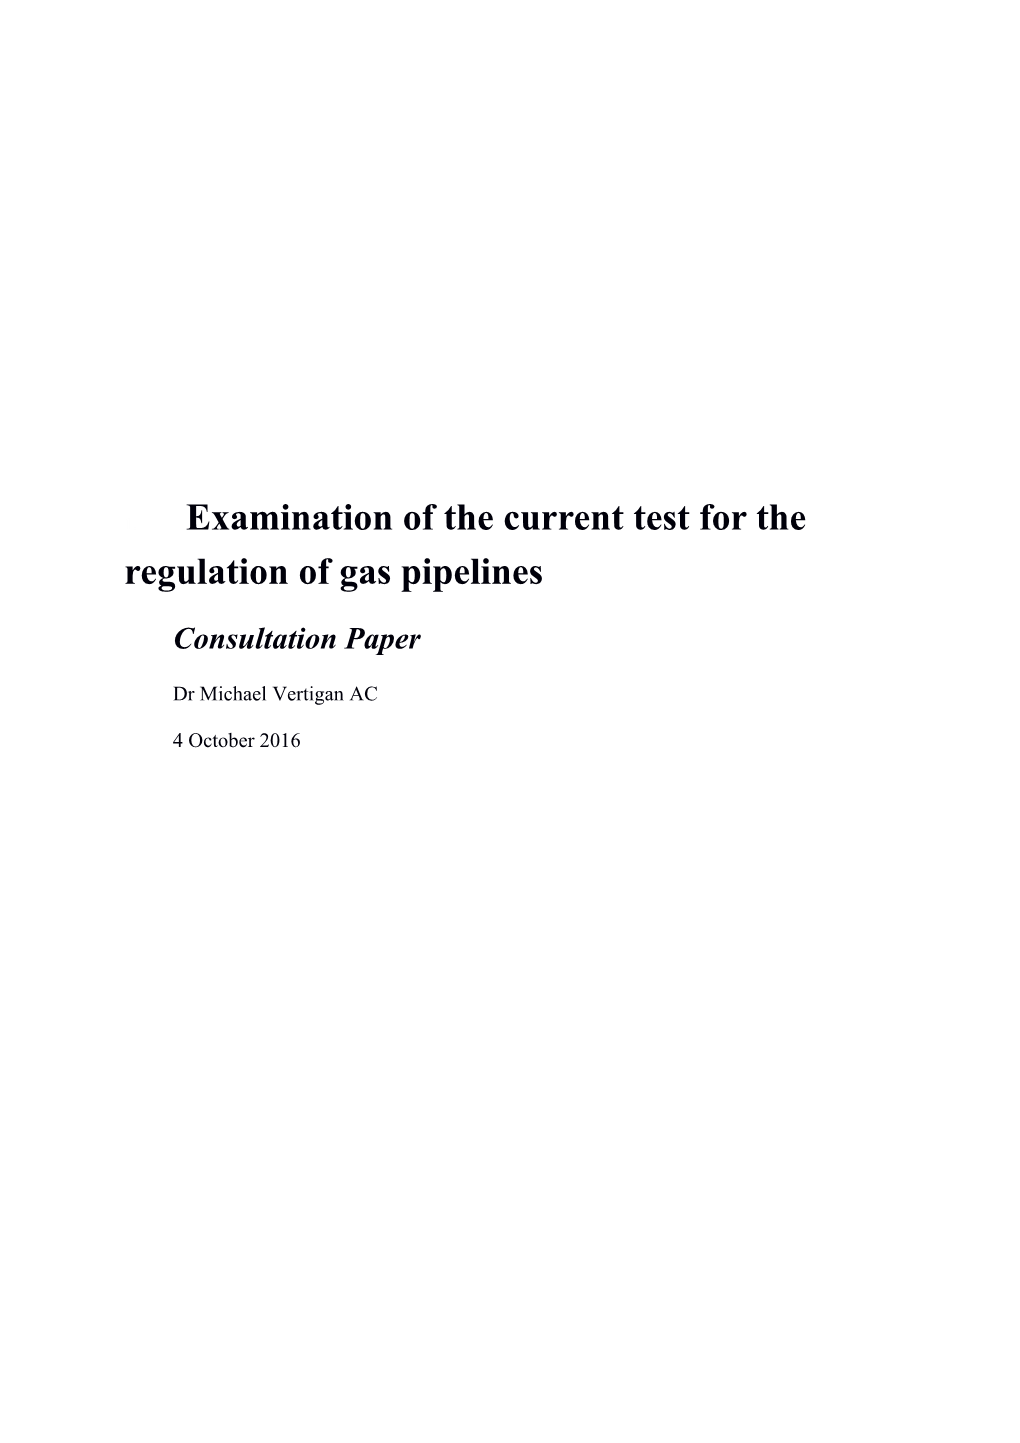 Examination of the Current Test for the Regulation of Gas Pipelines: Consultation Paper